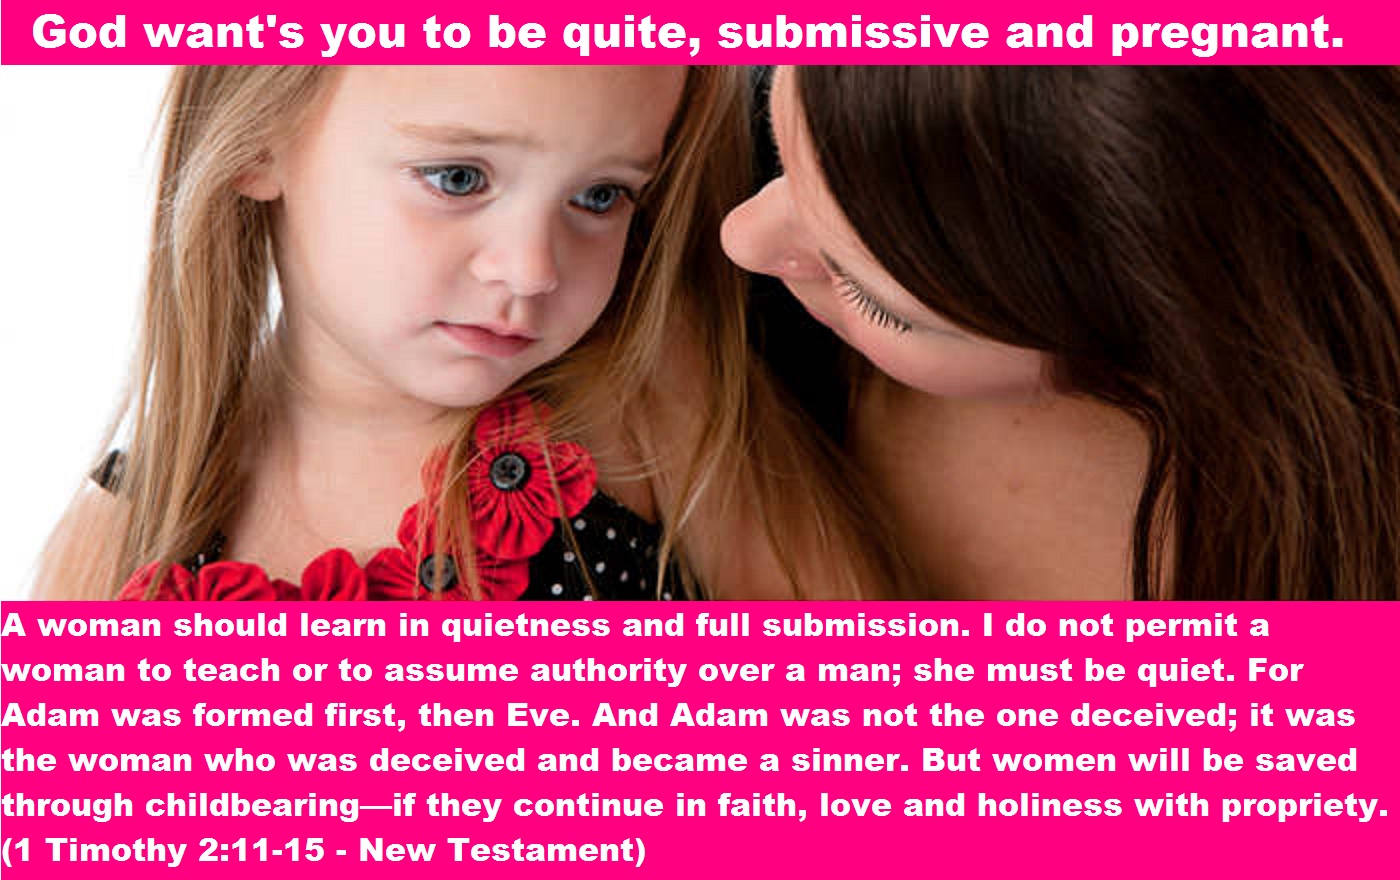 A woman should learn in quietness and full submission. I do not permit a woman to teach or to assume authority over a man; she must be quiet. For Adam was formed first, then Eve. And Adam was not the one deceived; it was the woman who was deceived and became a sinner. But women will be saved through childbearing—if they continue in faith, love and holiness with propriety. (1 Timothy 2:11-15 - New Testament)